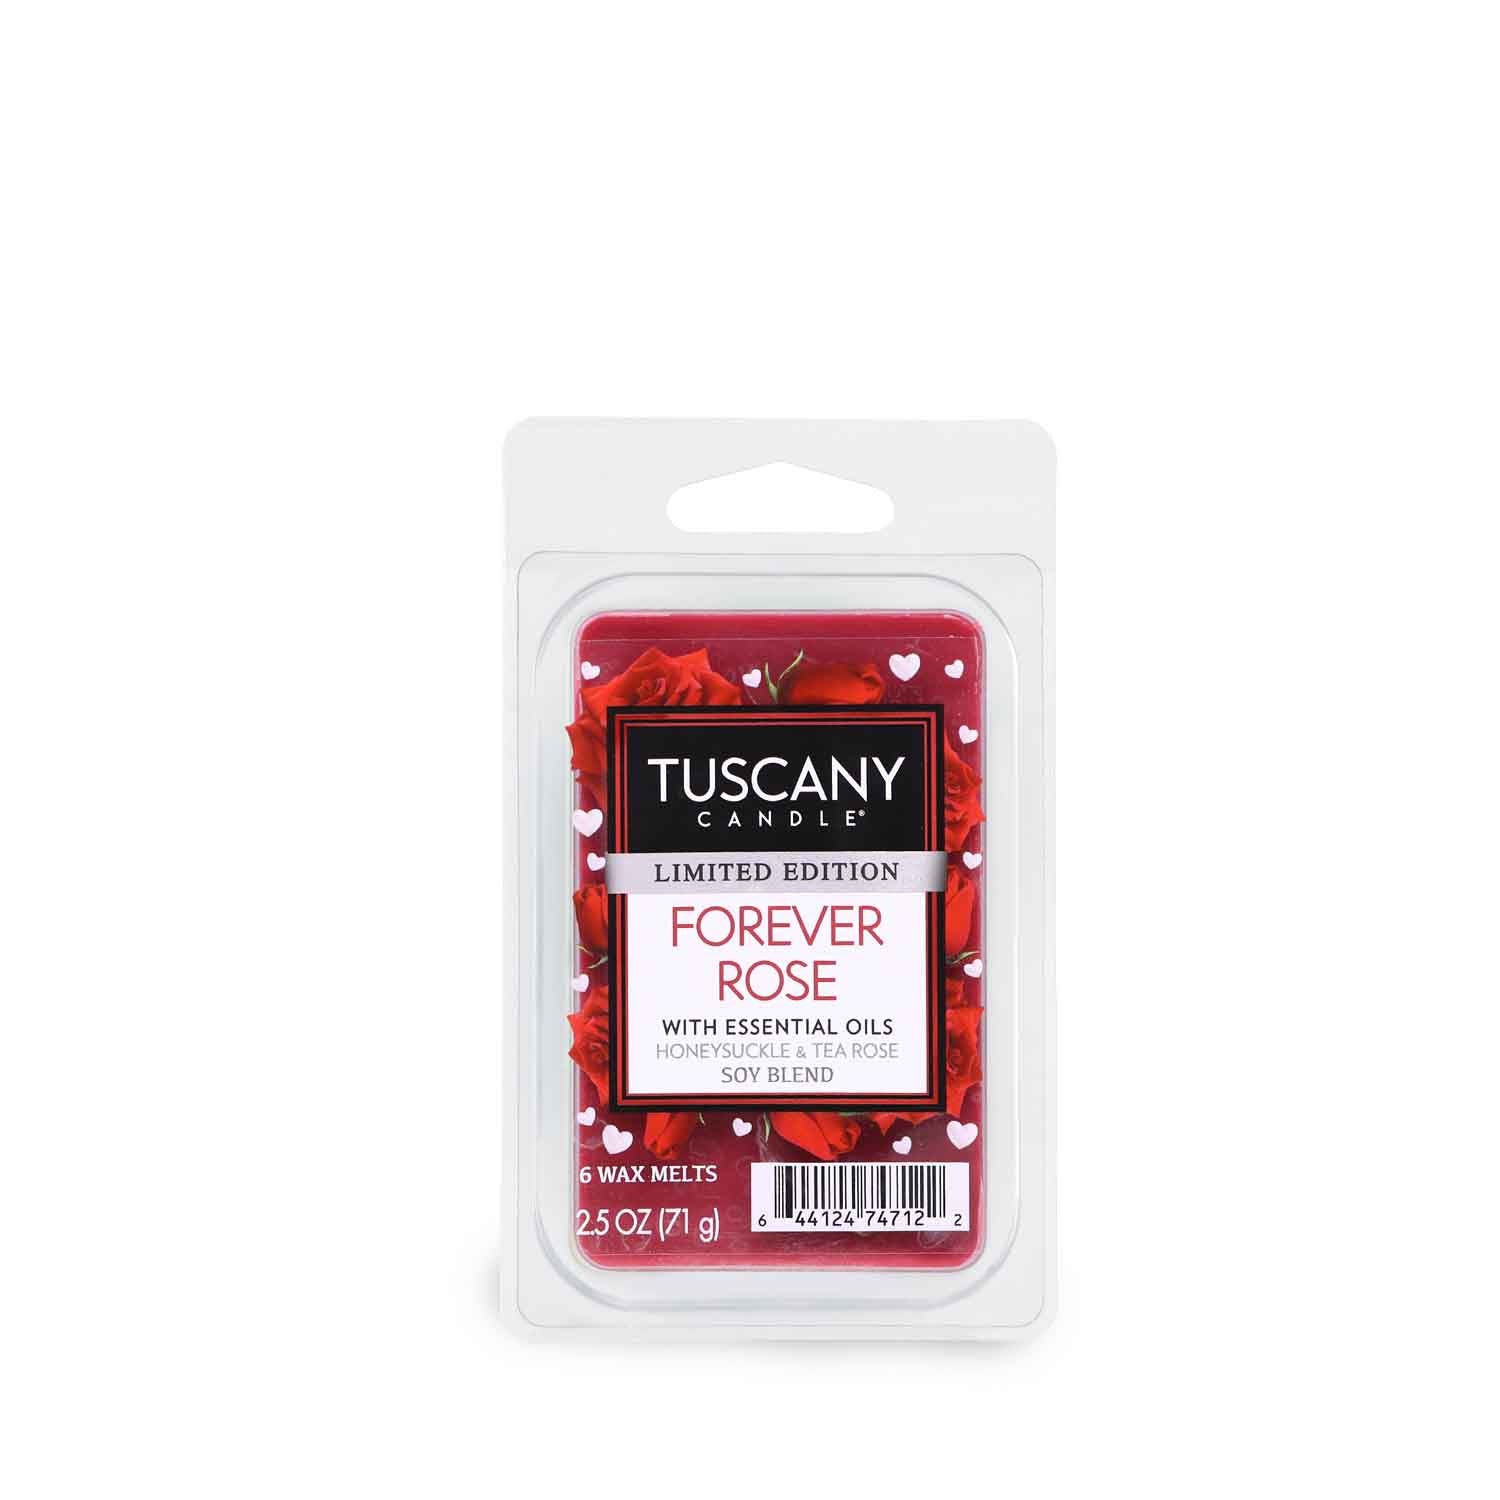 Tuscany Candle Valentine's Day Limited Edition Love Outlet Warmer